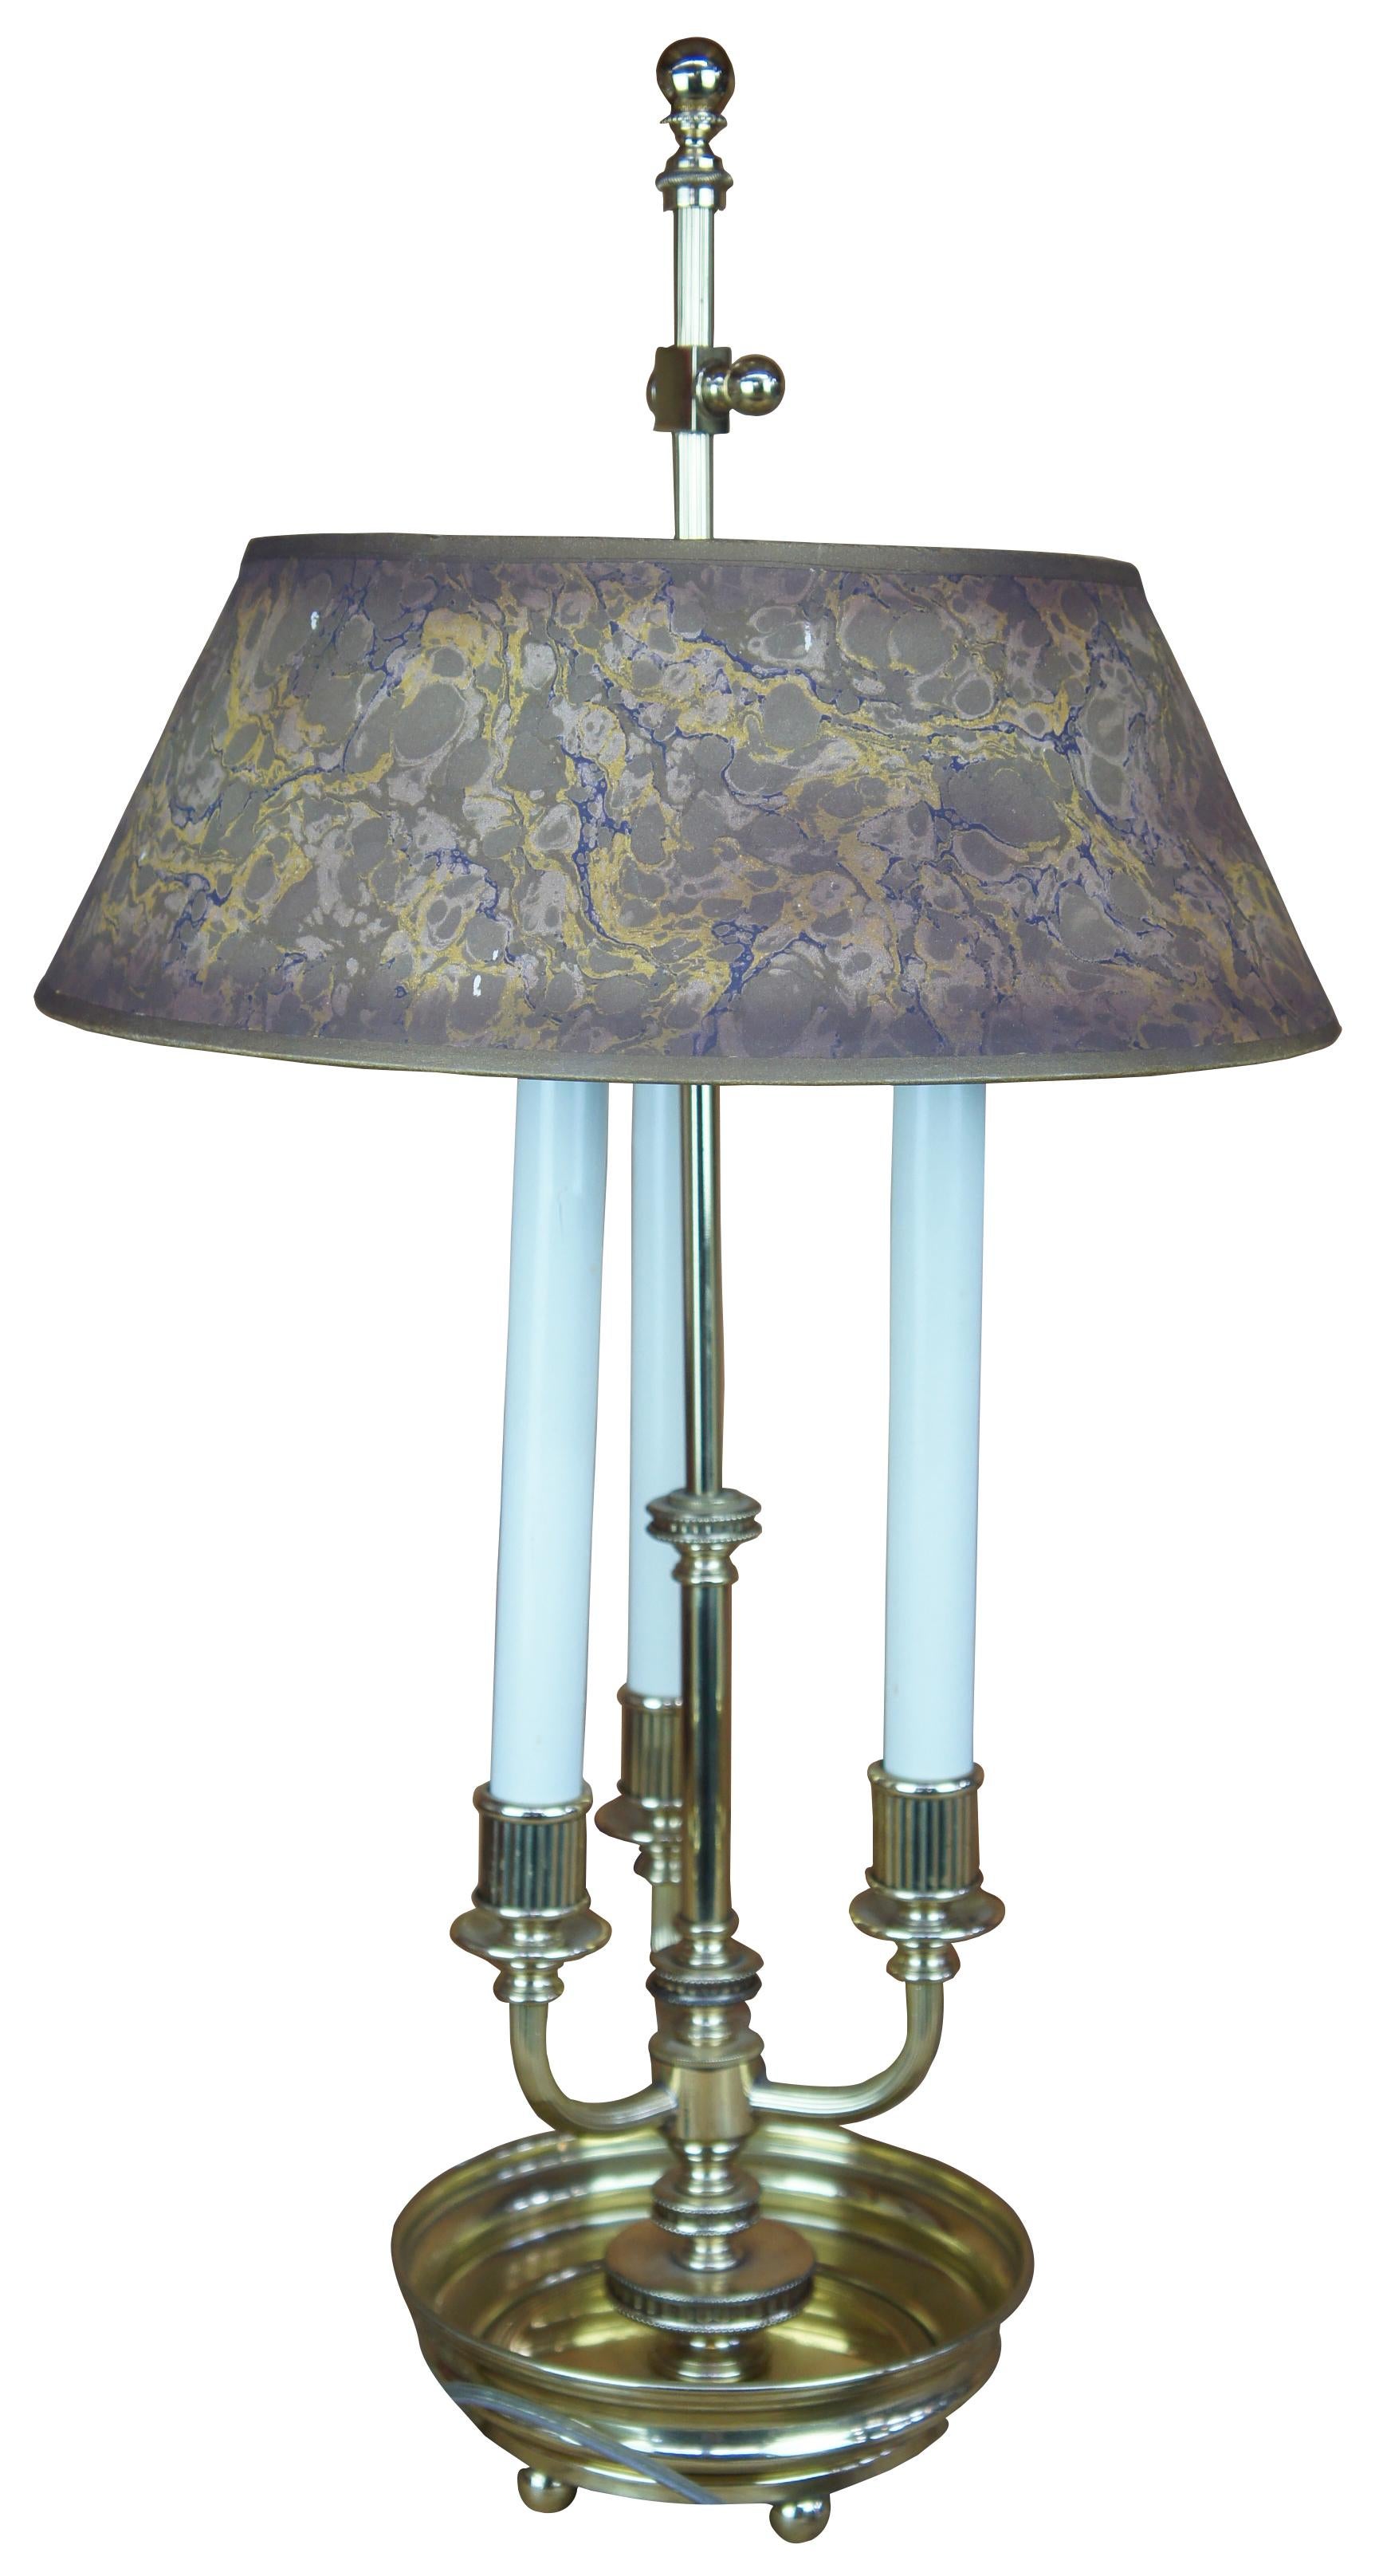 Mid century French Bouillotte table lamp. Made of brass featuring round footed circular tray base, three candlesticks lights and round marbled shade.
  